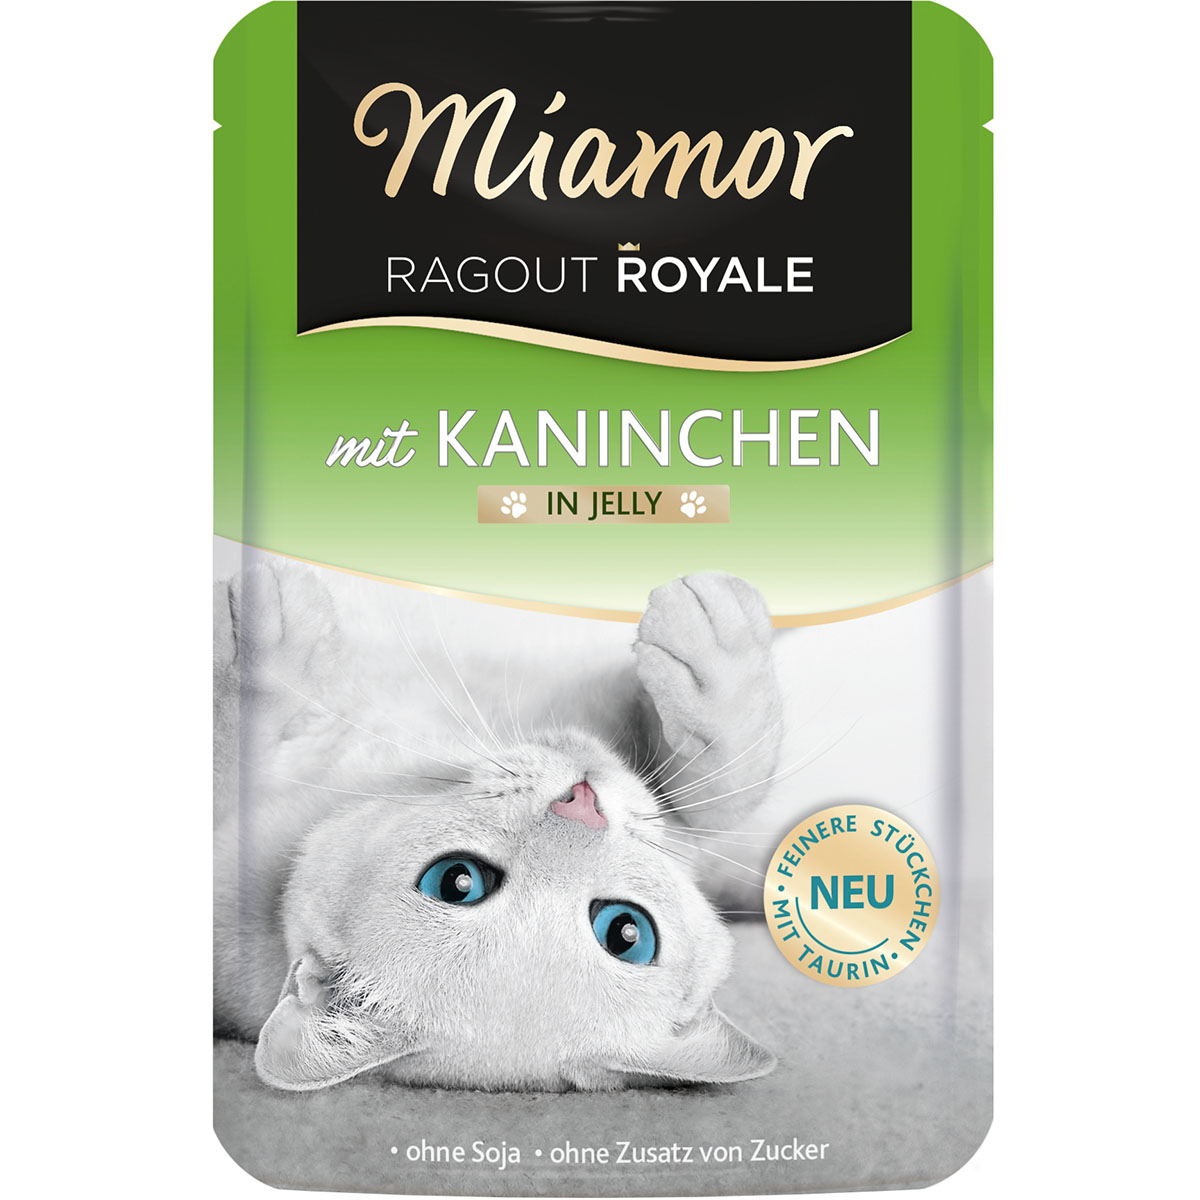 miamor ragout royal kaninchen in jelly 100g